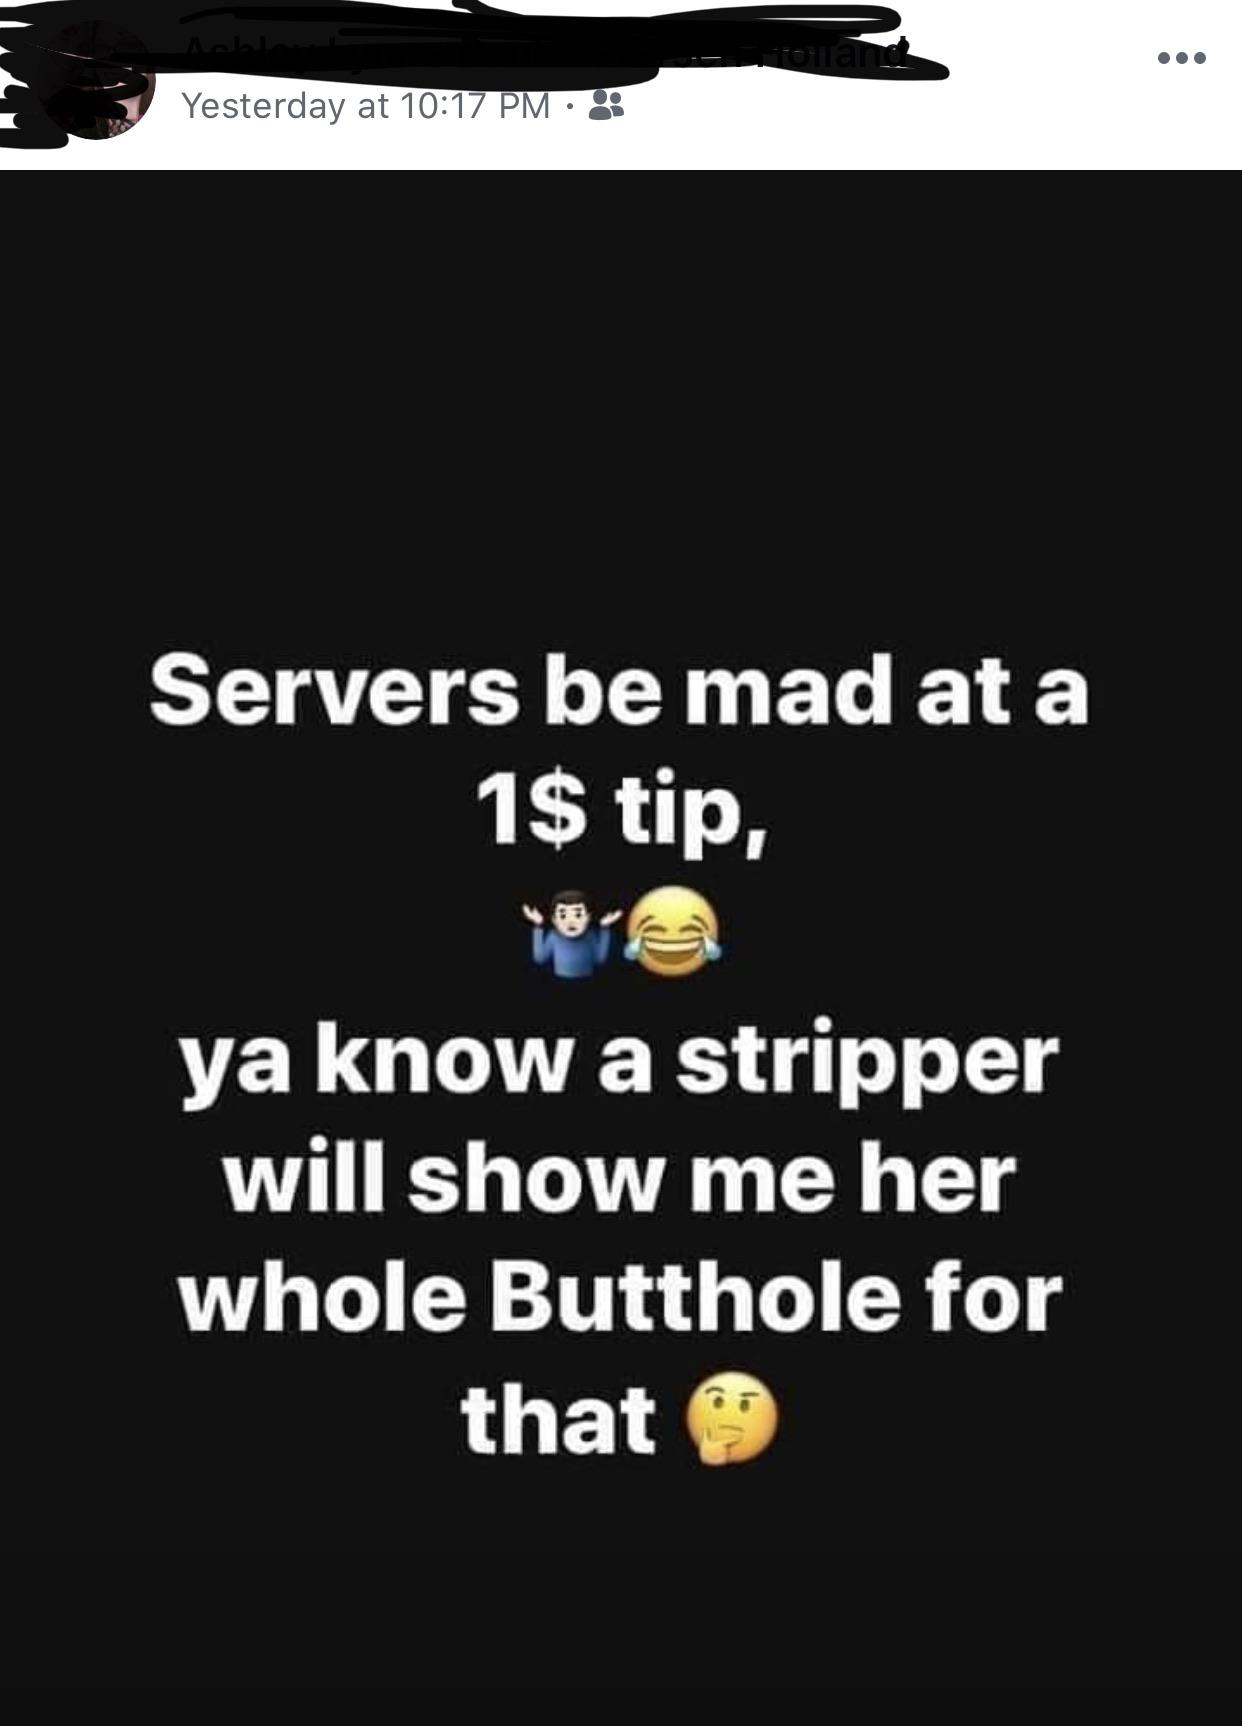 screenshot - Yesterday at 3 Servers be mad at a 1$ tip, ya know a stripper will show me her whole Butthole for that